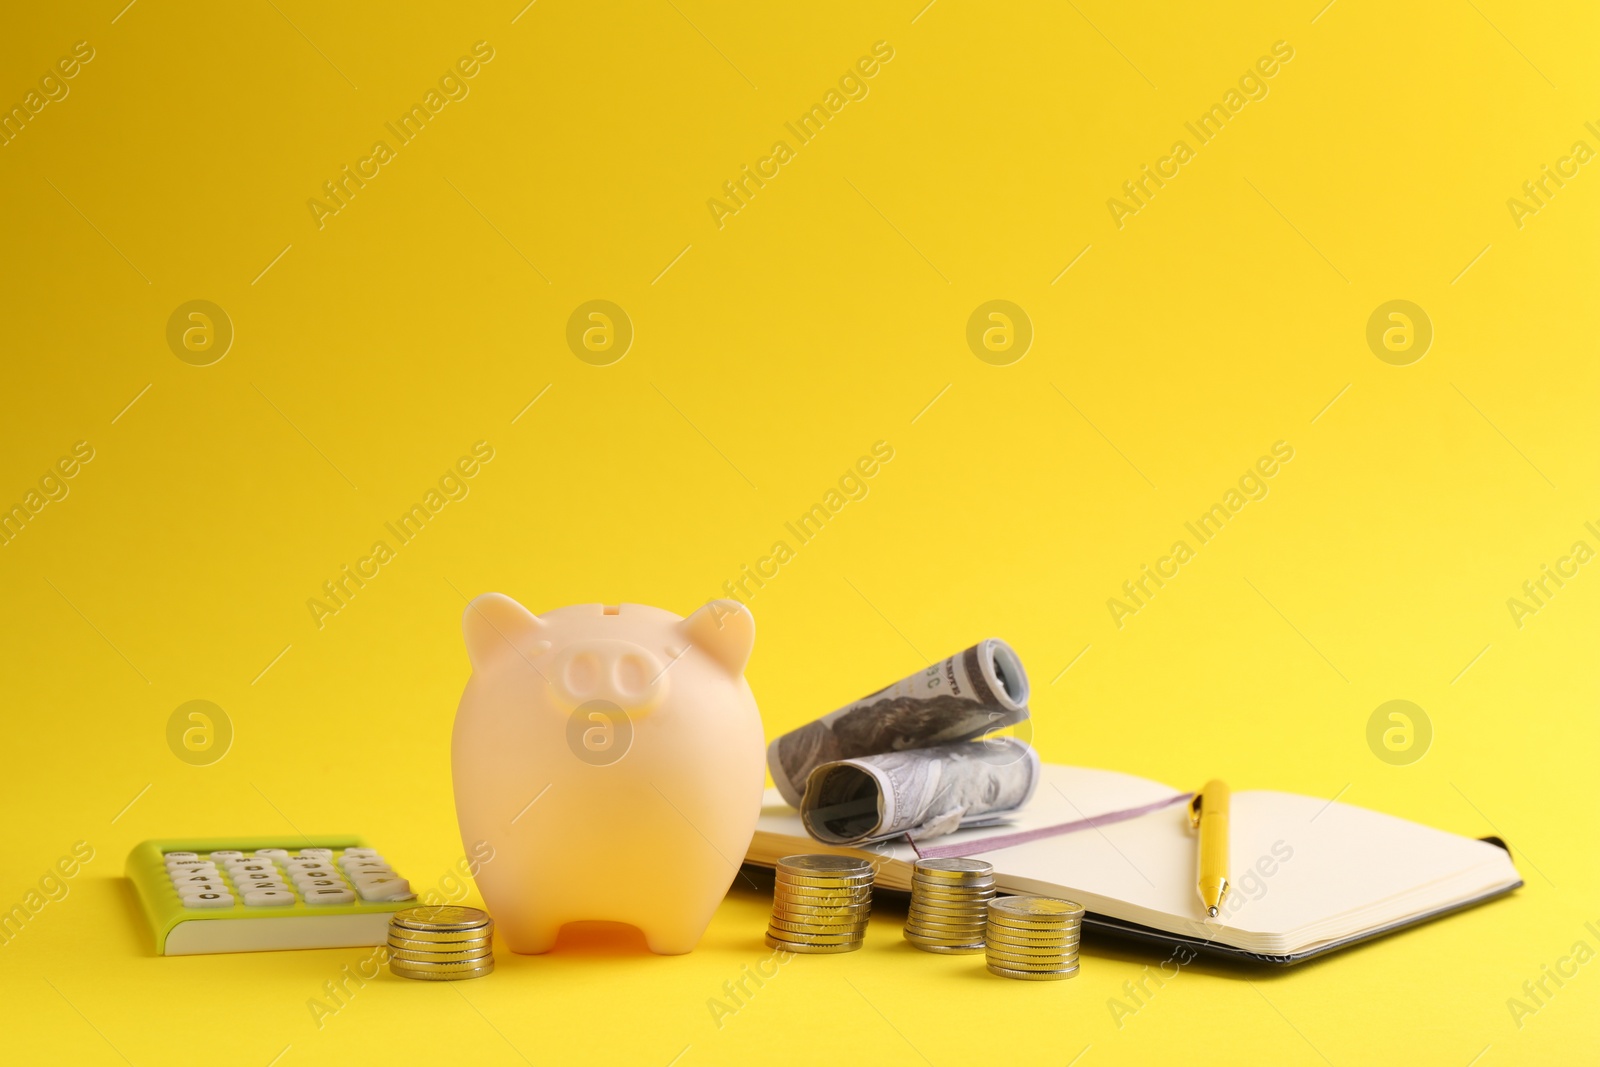 Photo of Financial savings. Piggy bank, money, calculator and stationery on yellow background